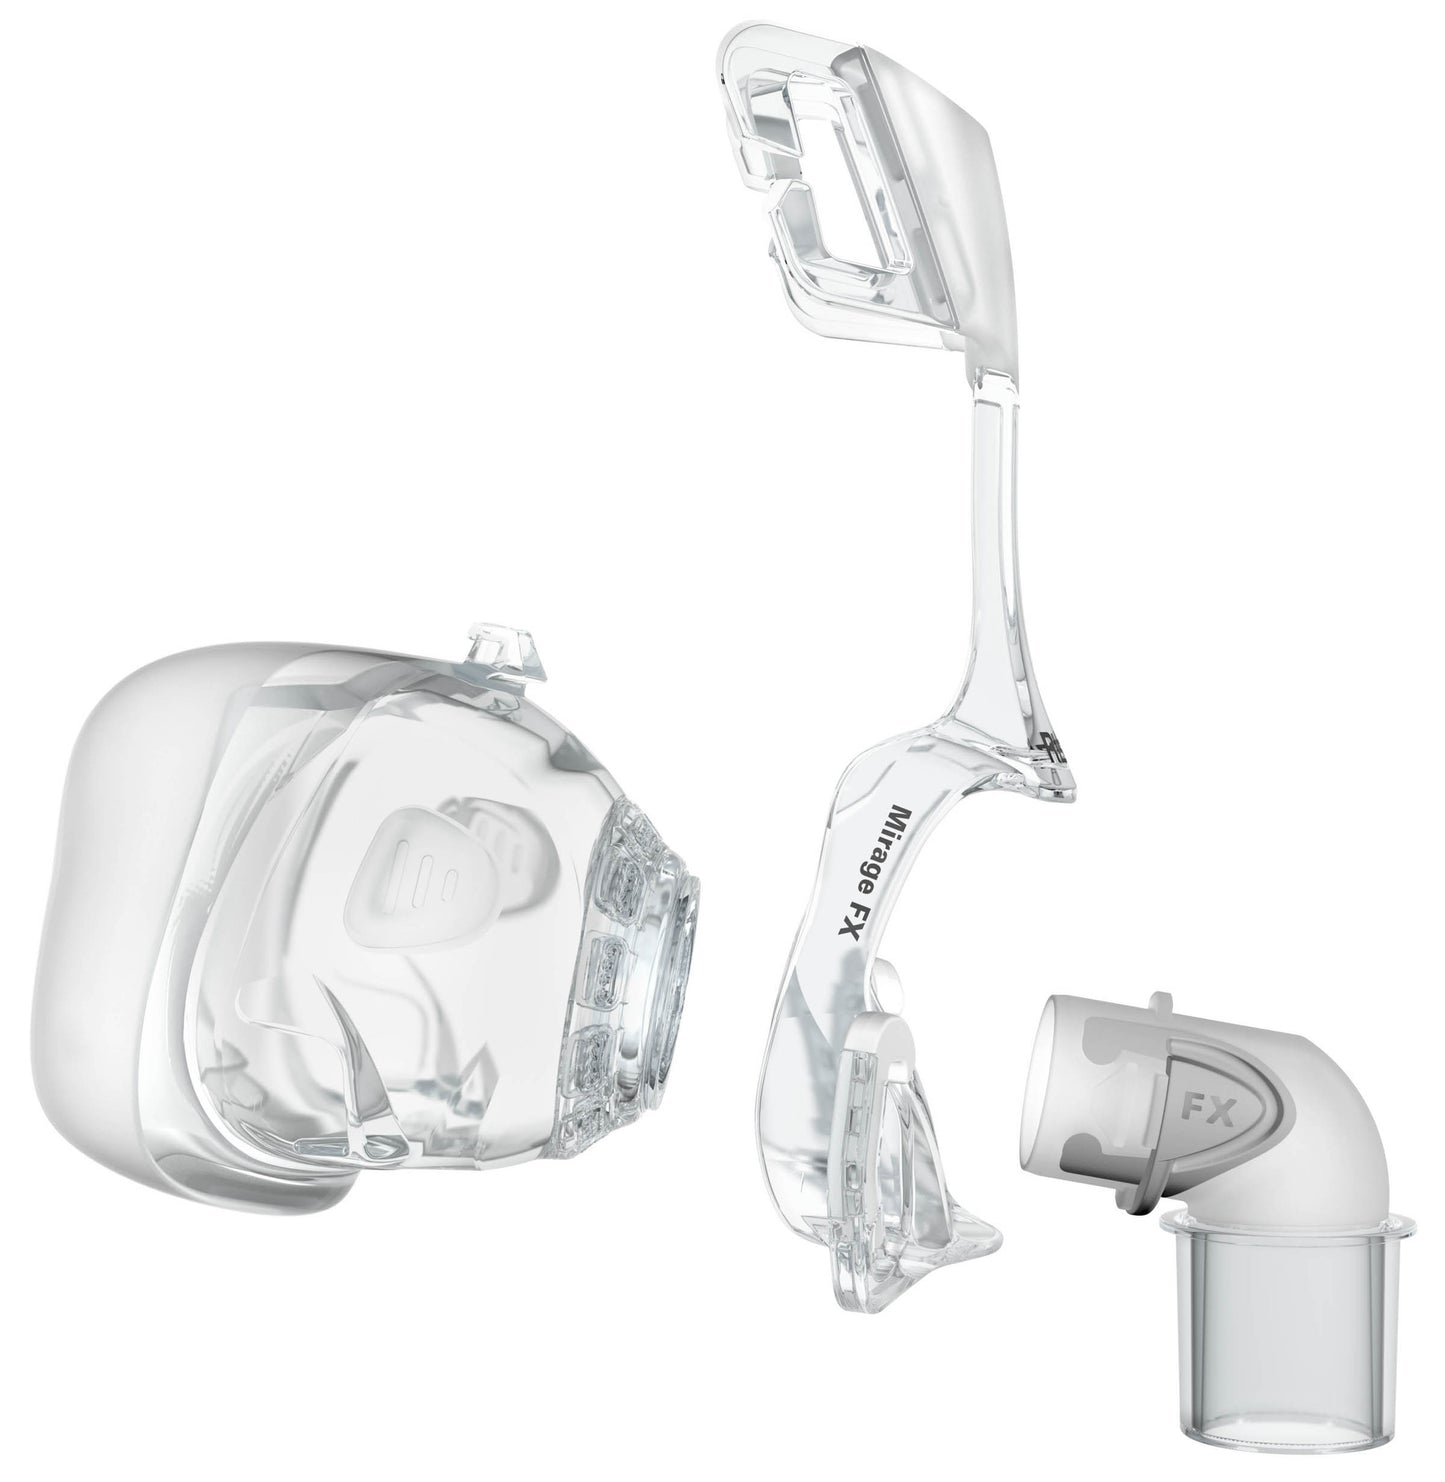 Mirage FX Nasal Mask for HER